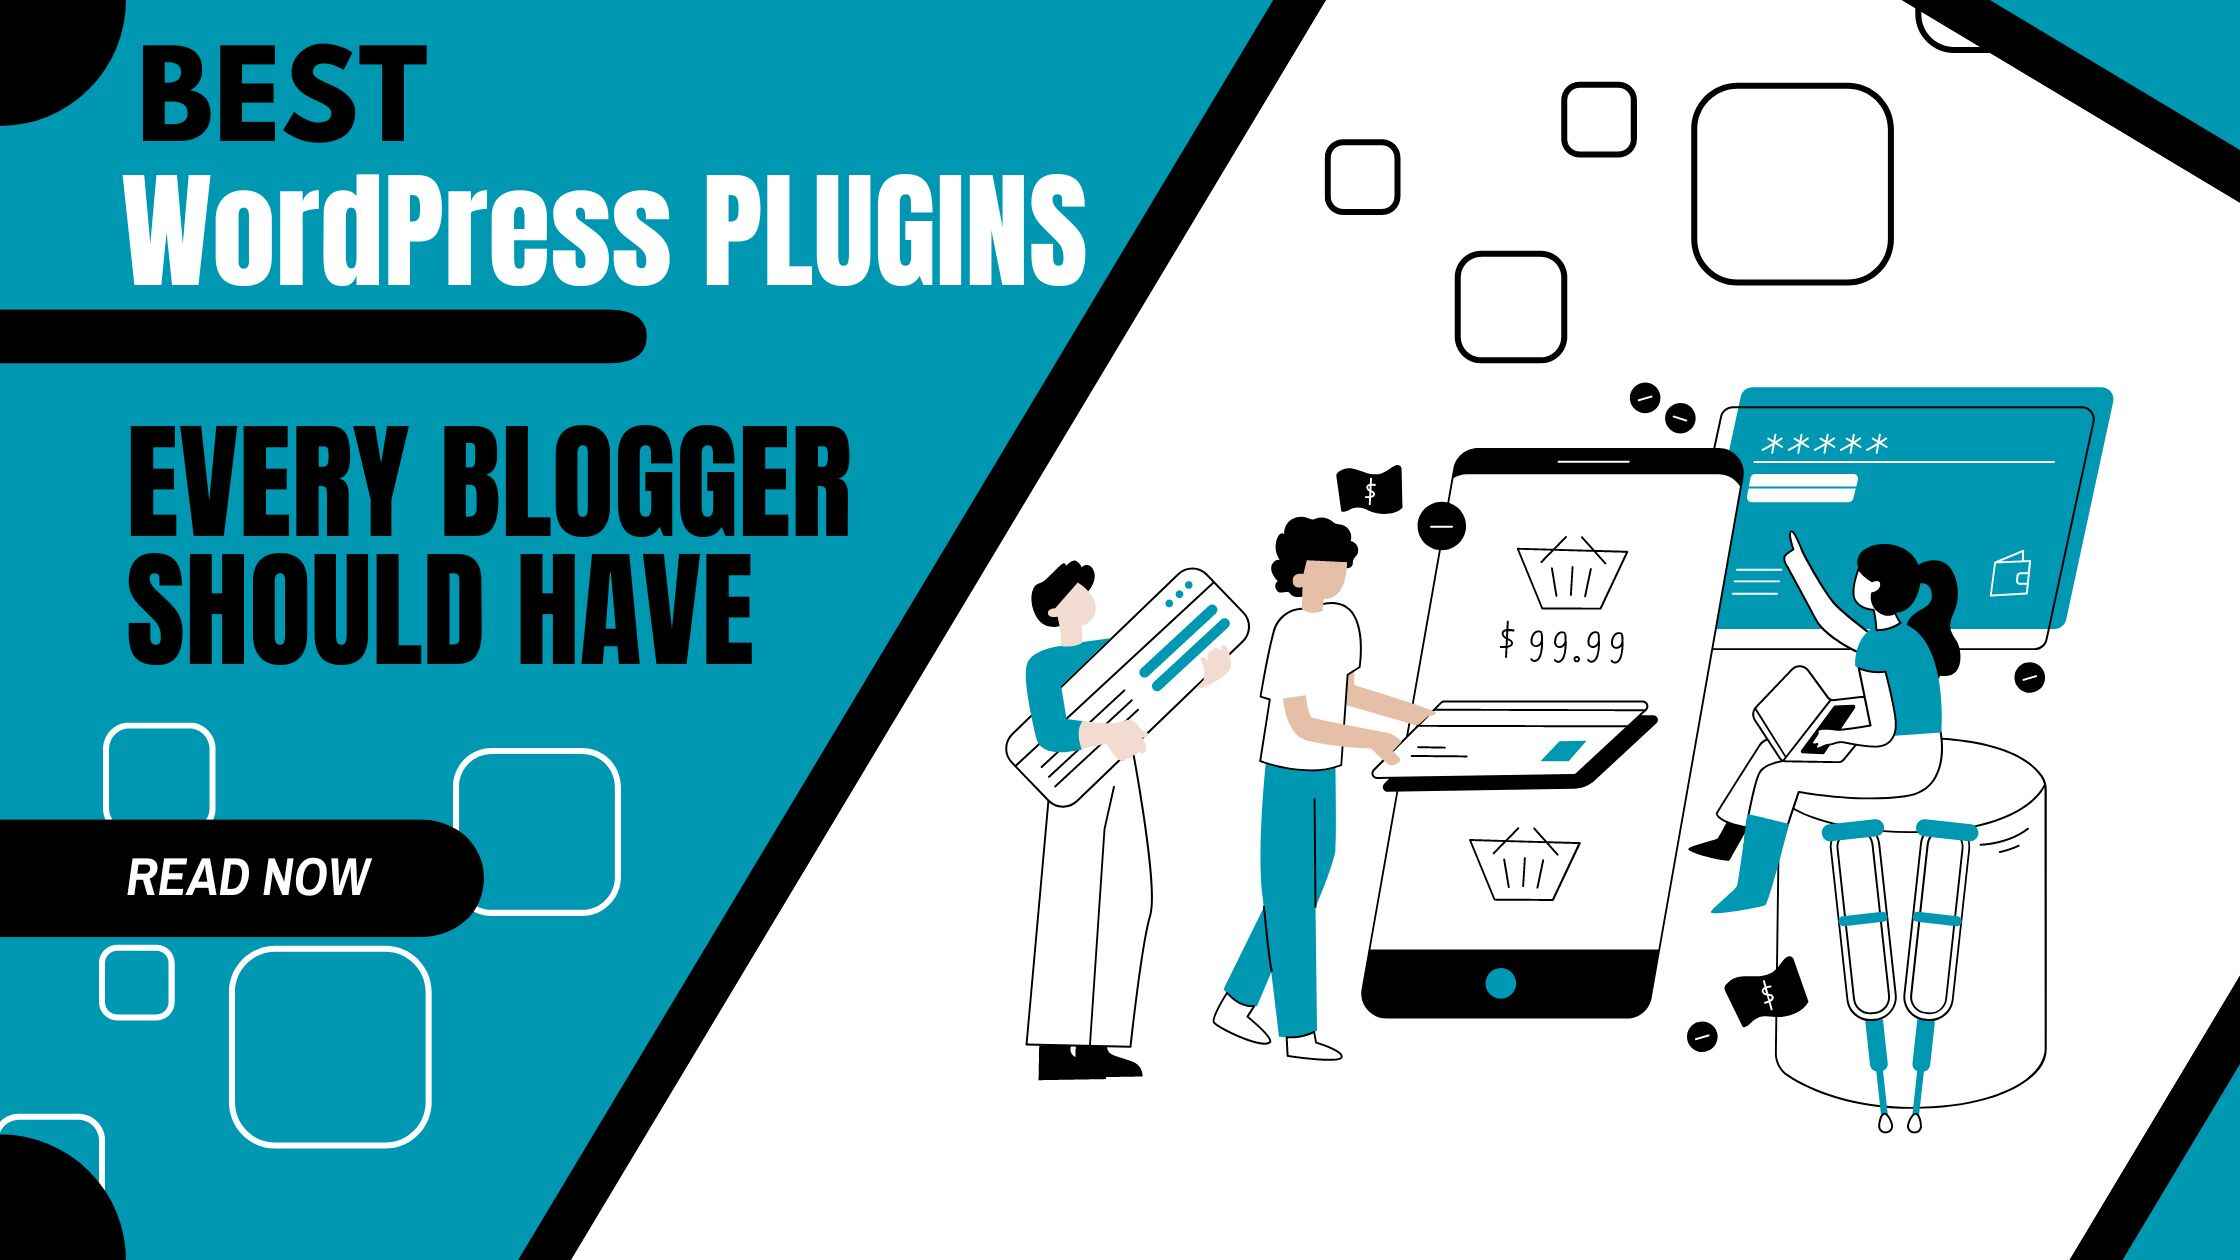 10 WordPress Plugins Every Blogger Should Have